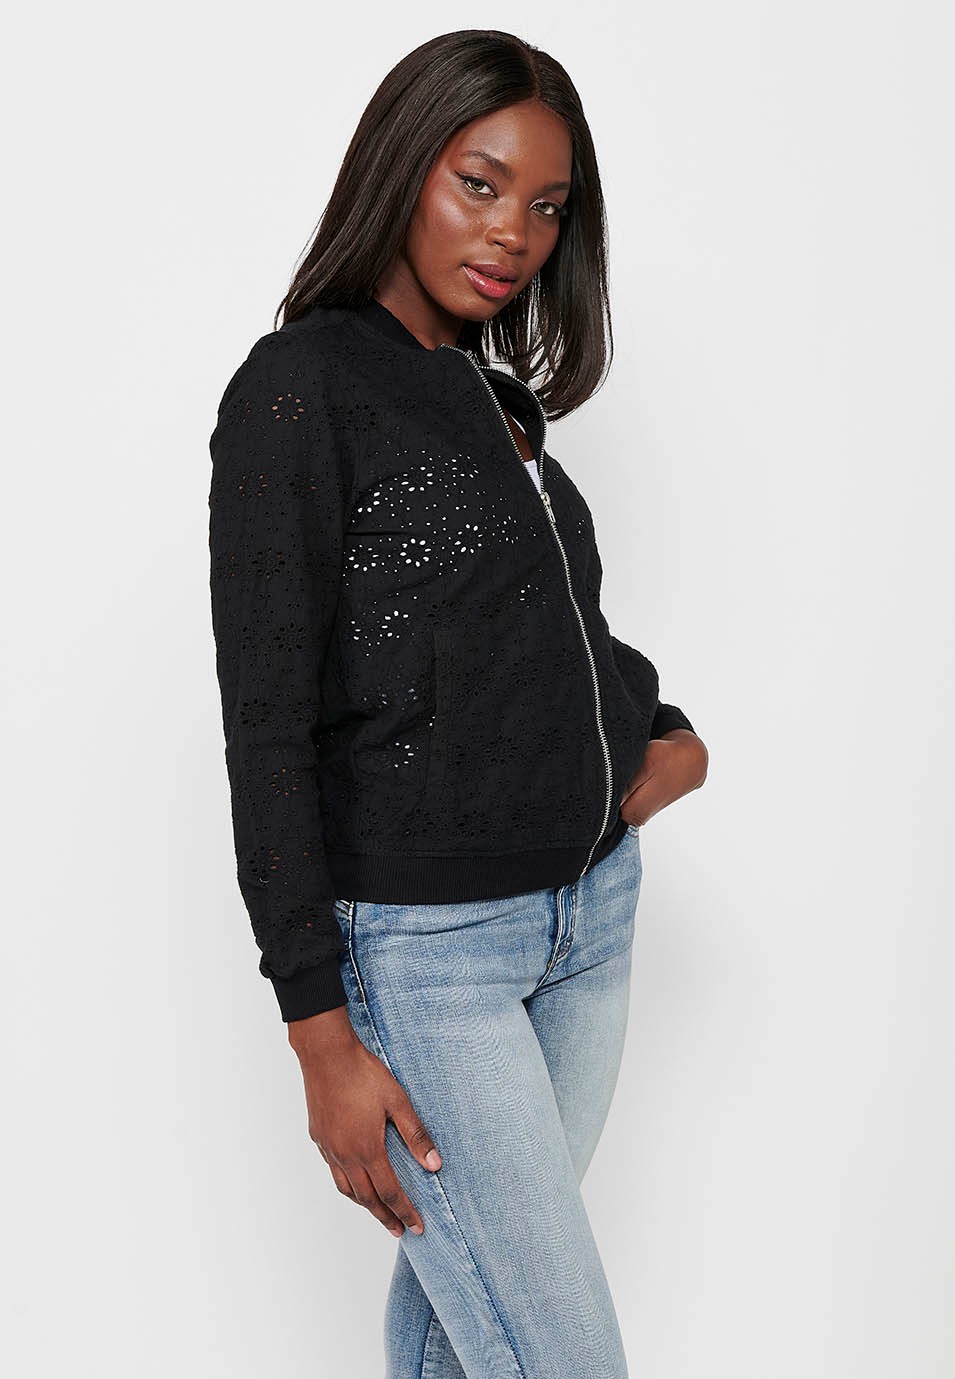 Cotton Sweatshirt with Zipper Front Closure and Rib Finishes with Embroidered Fabric with Floral Motifs and Black Round Neck for Women 6